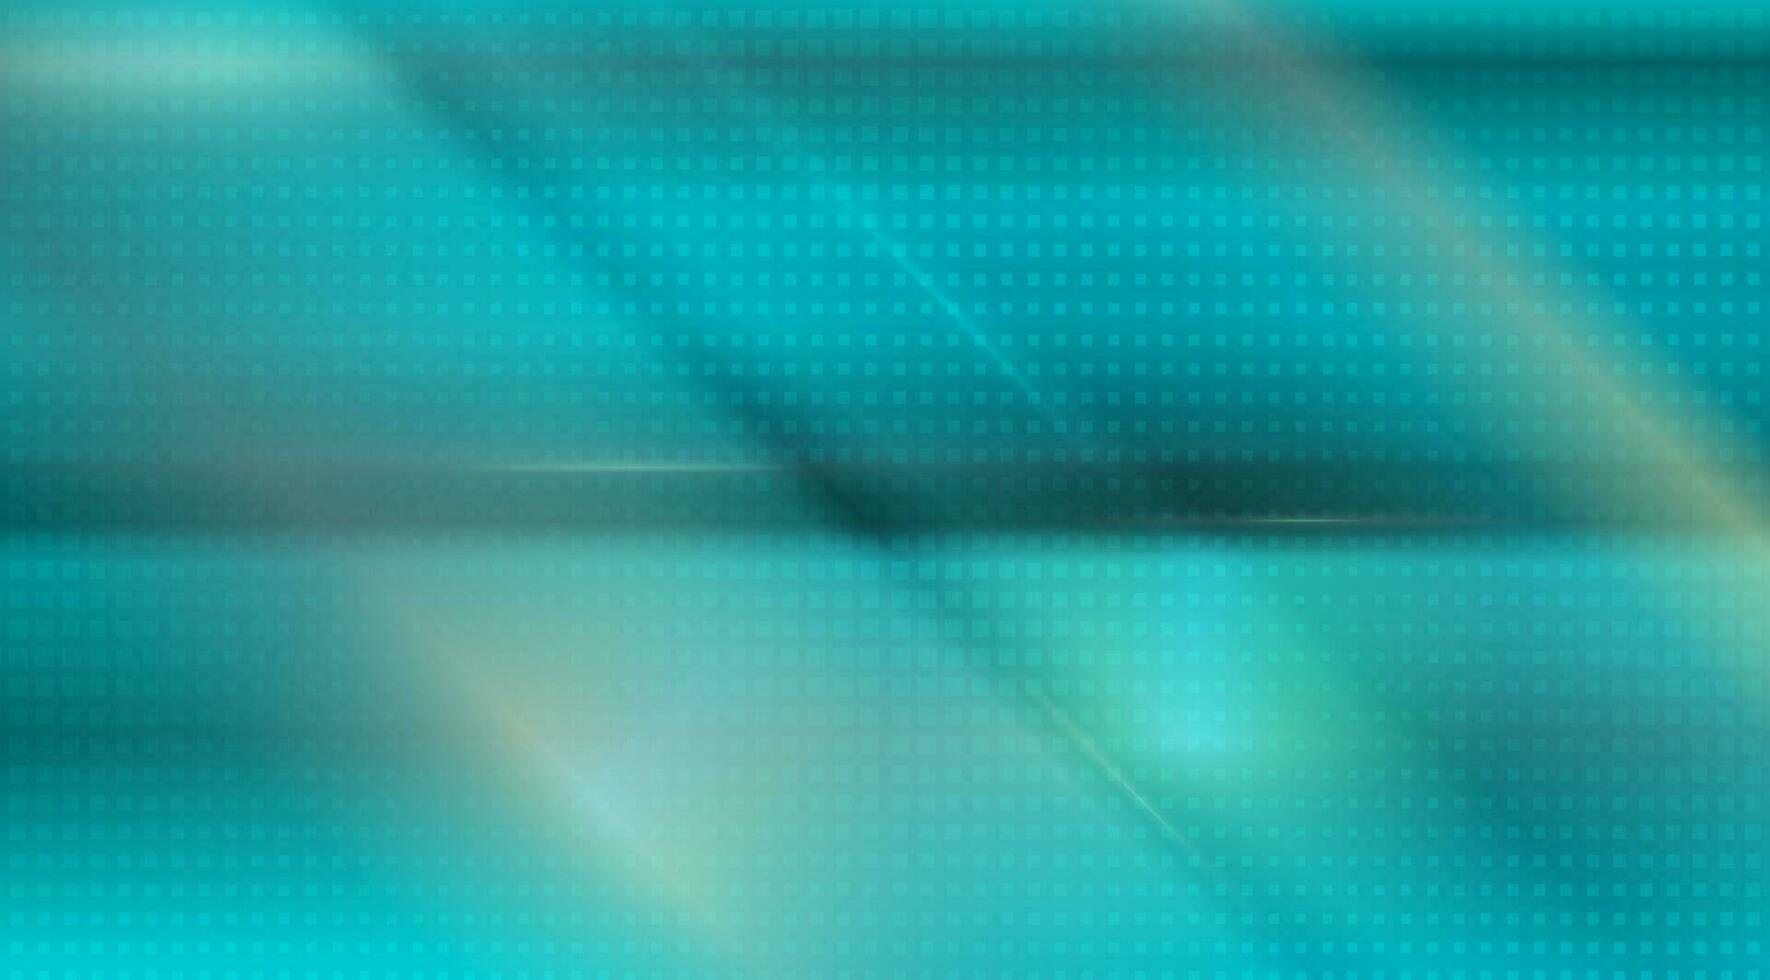 Cyan shiny glowing smooth stripes abstract background vector